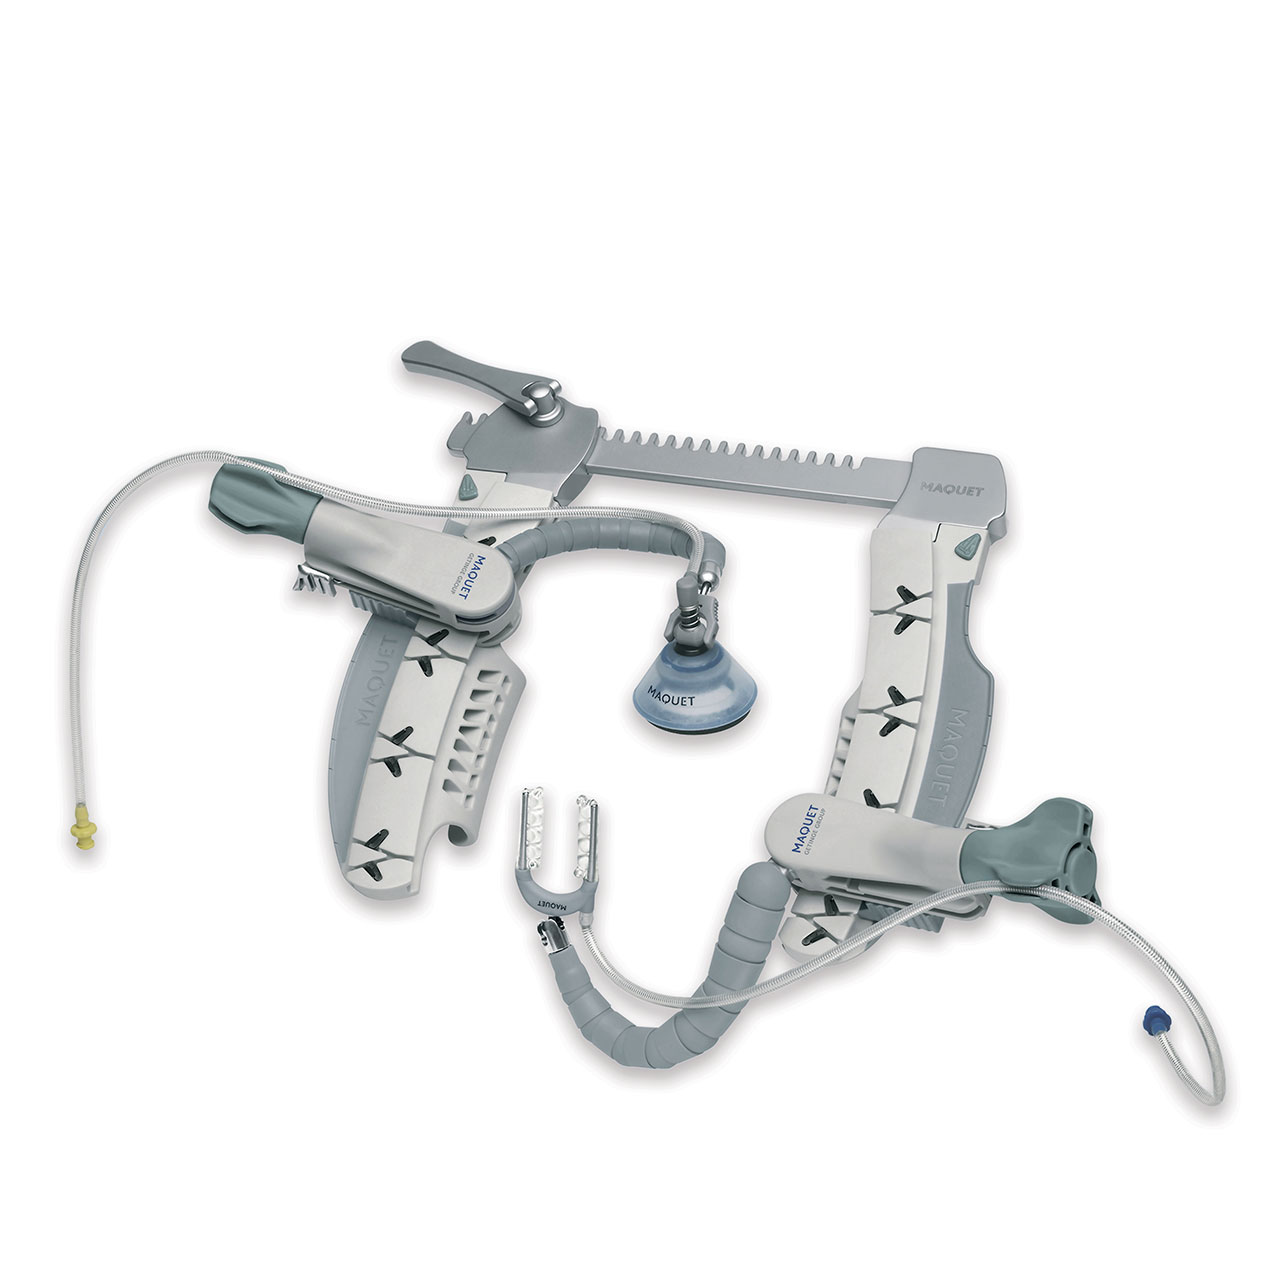 Acrobat-i Stabilizer helps surgeons gain better access and control for hard to reach vessels during coronary artergy bypass surgery CABG